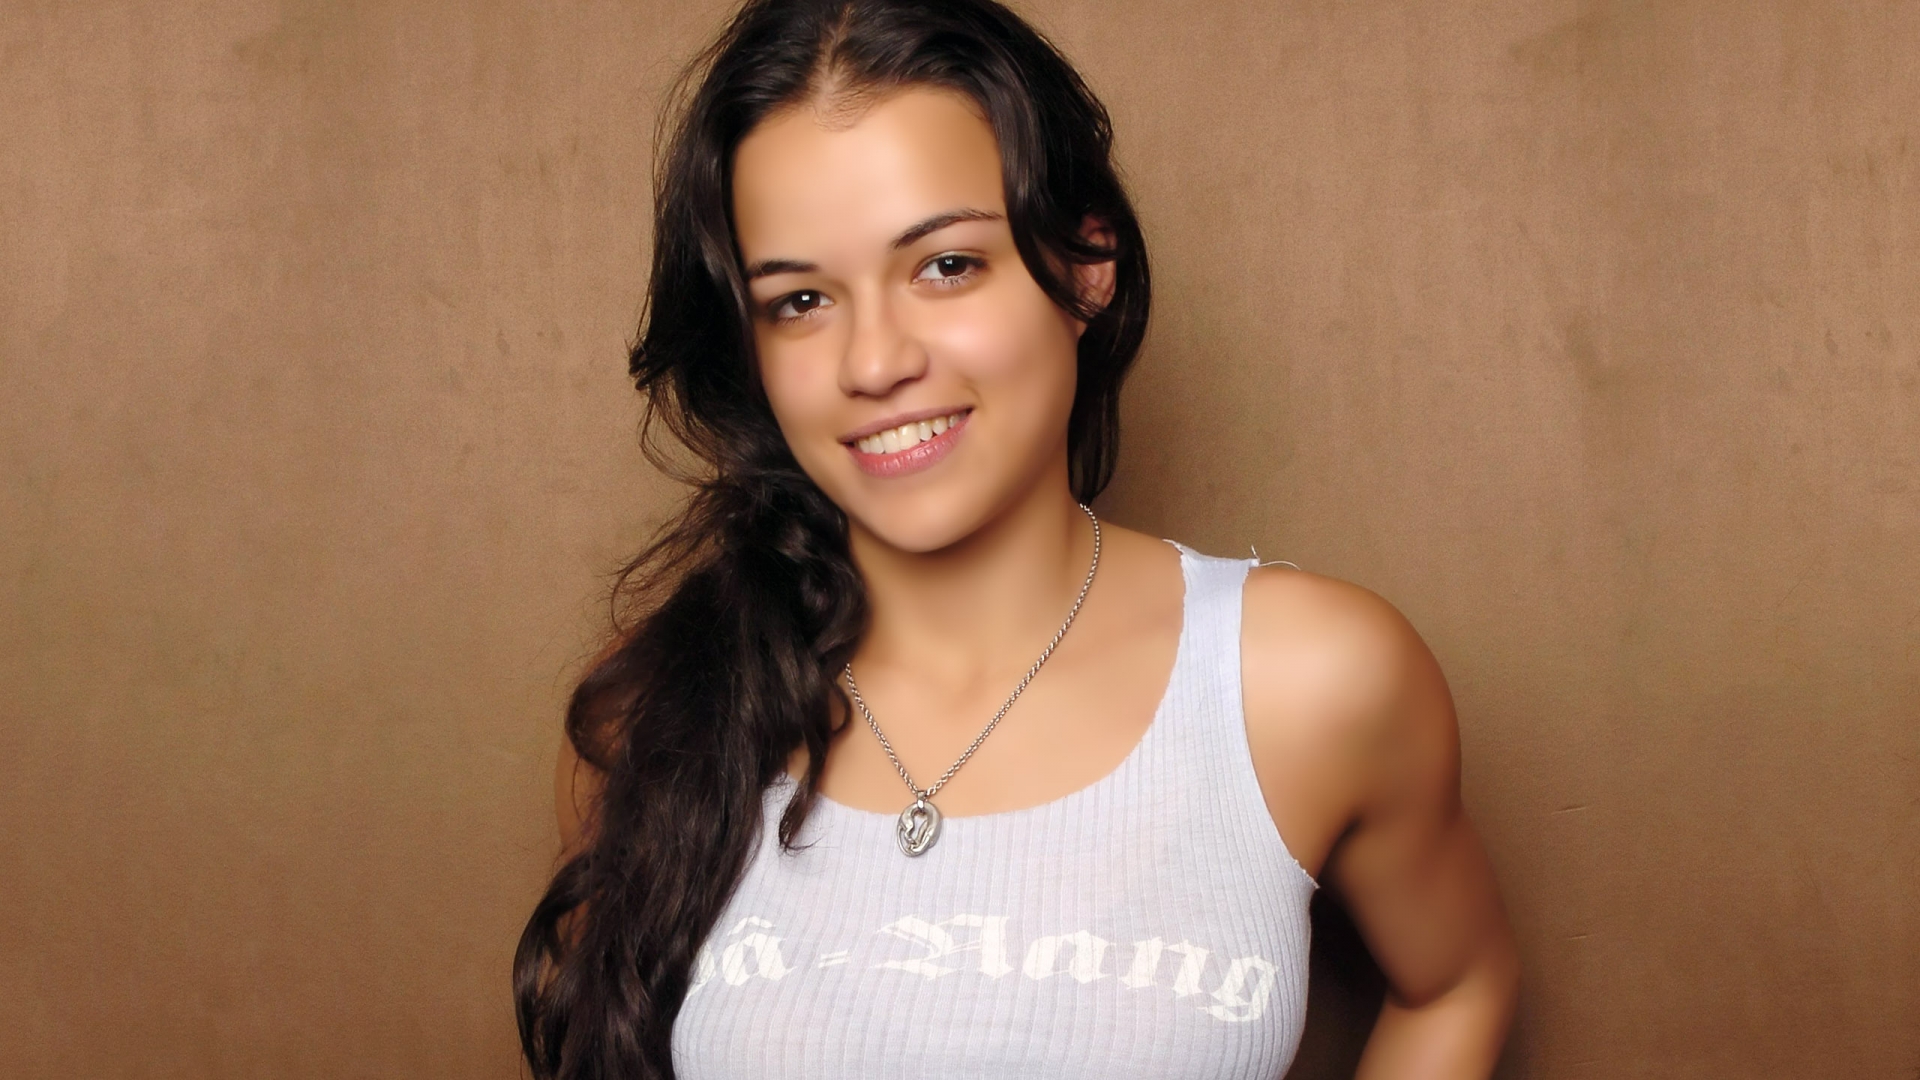 Michelle Rodriguez Smiling for 1920 x 1080 HDTV 1080p resolution